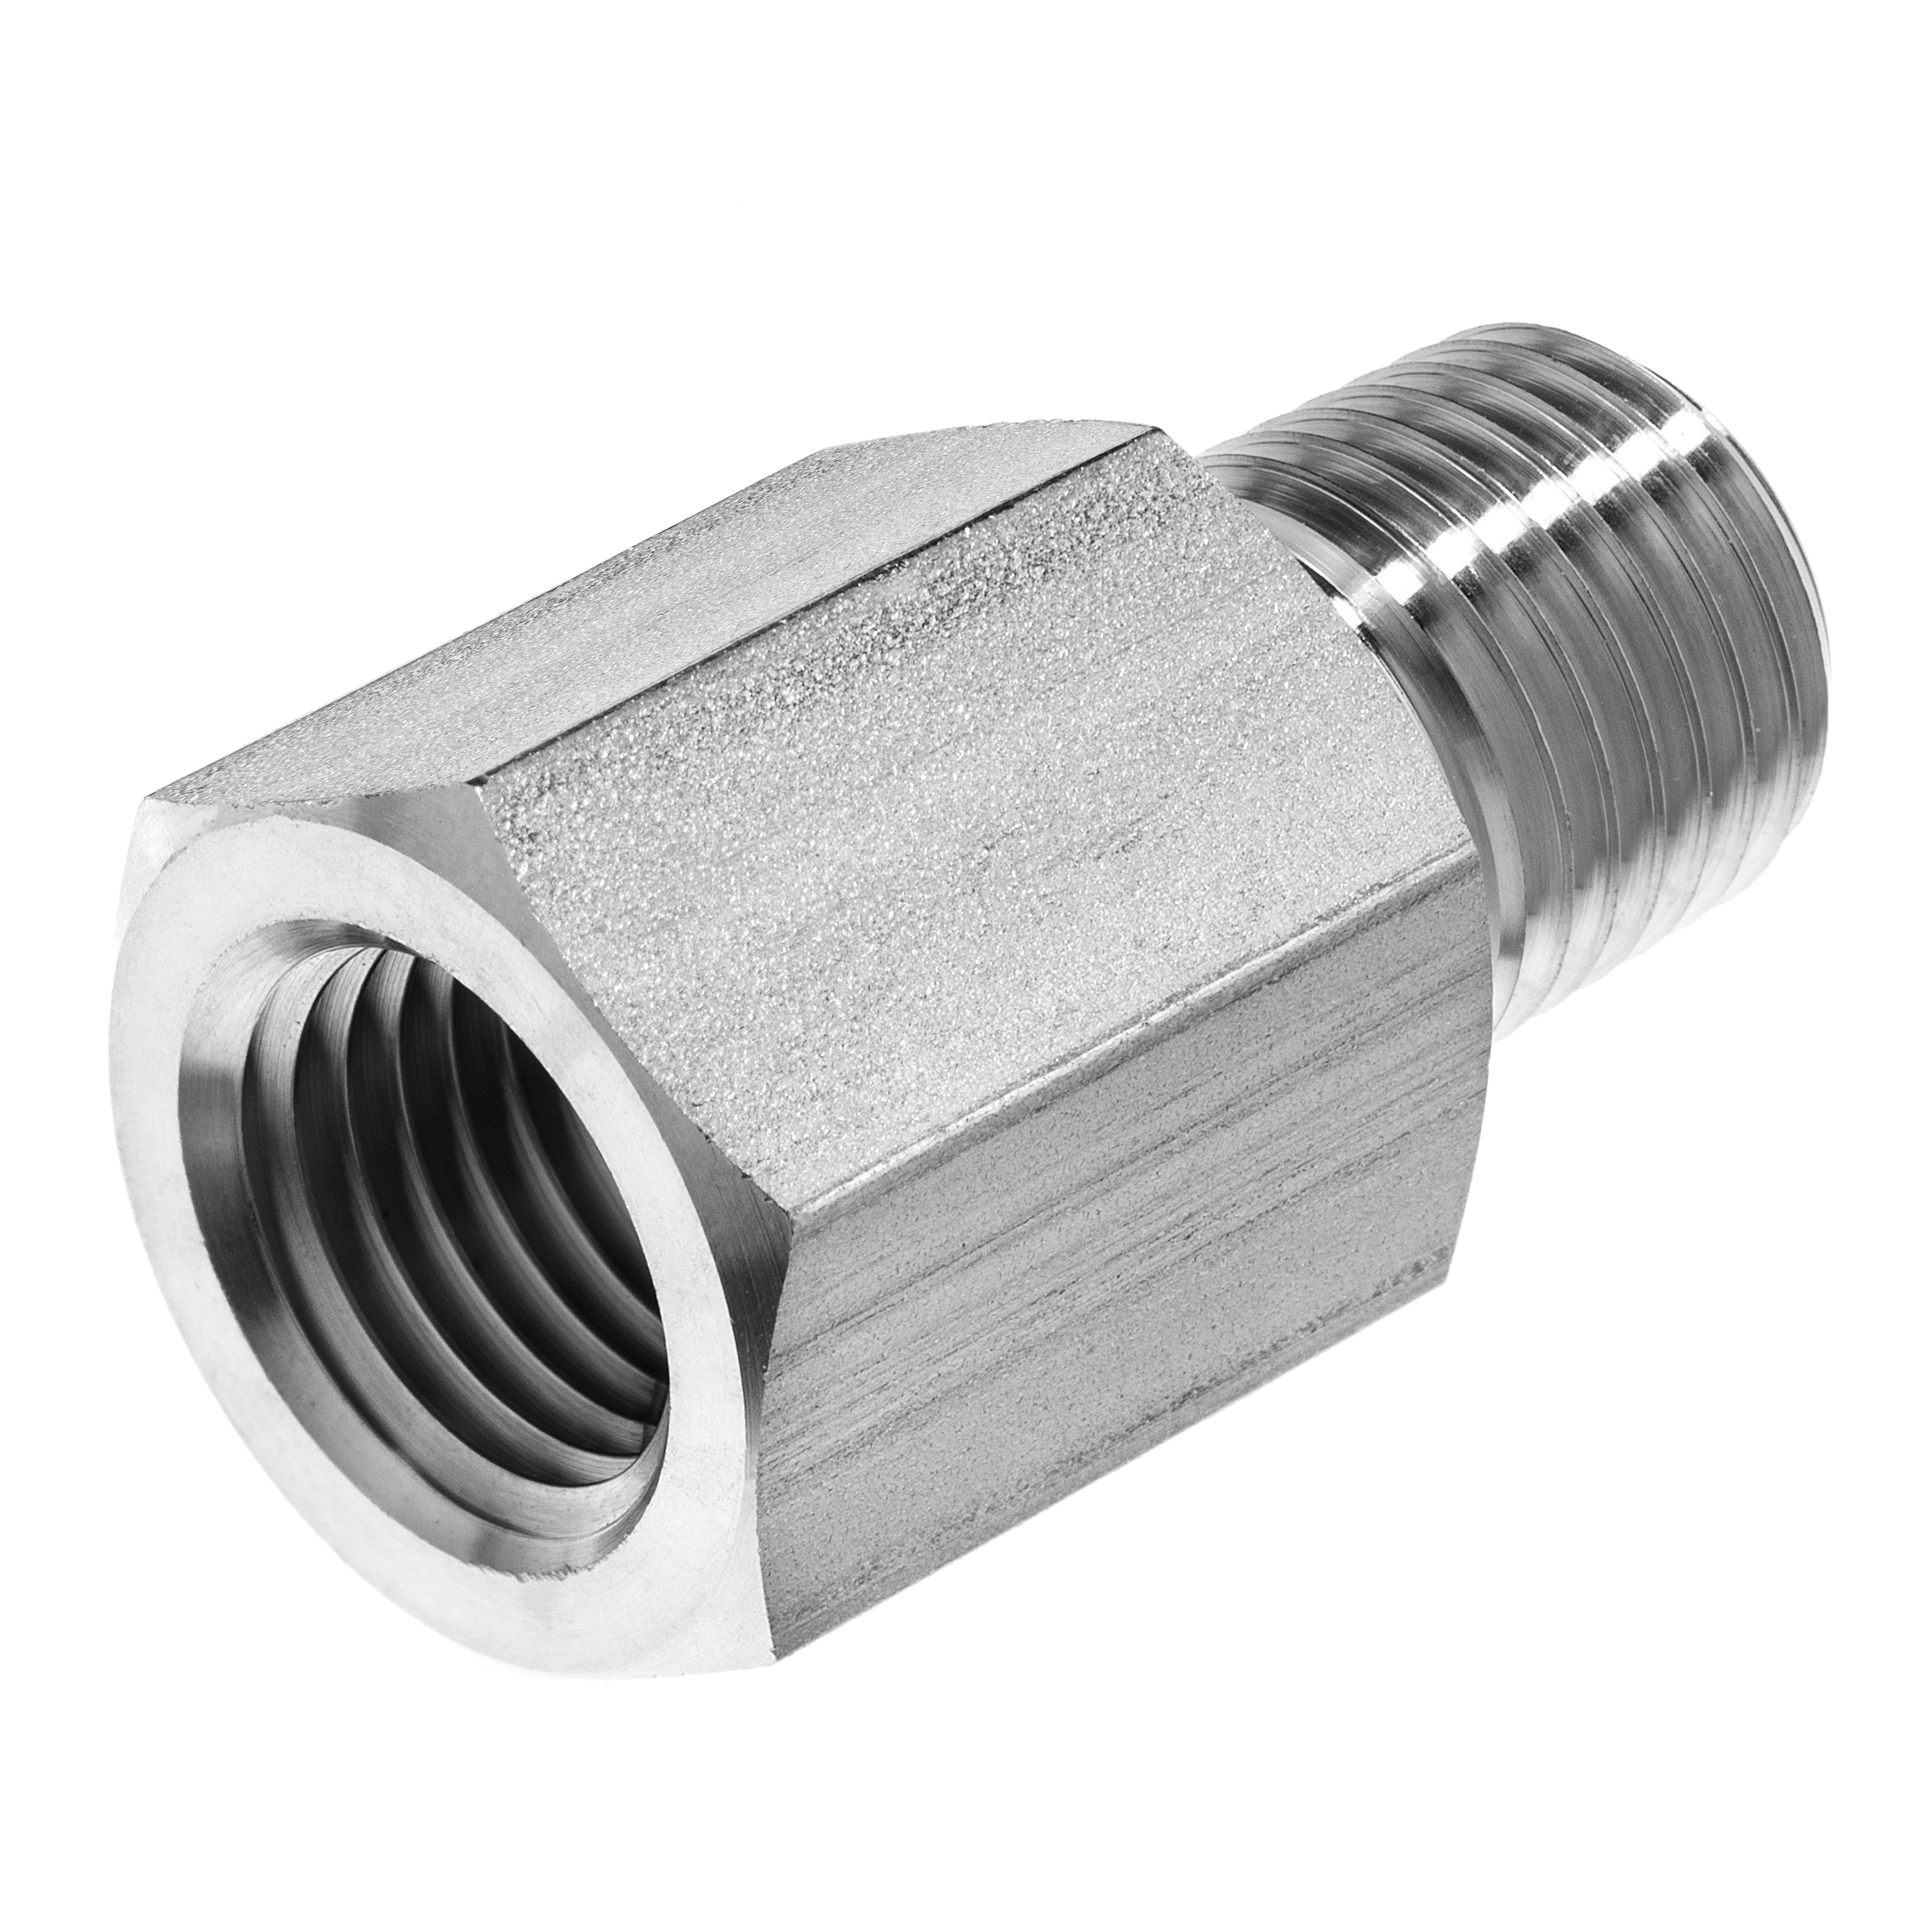 316 Stainless Steel Adapter Instrumentation Pipe Fitting Female NPT x Male BSPP